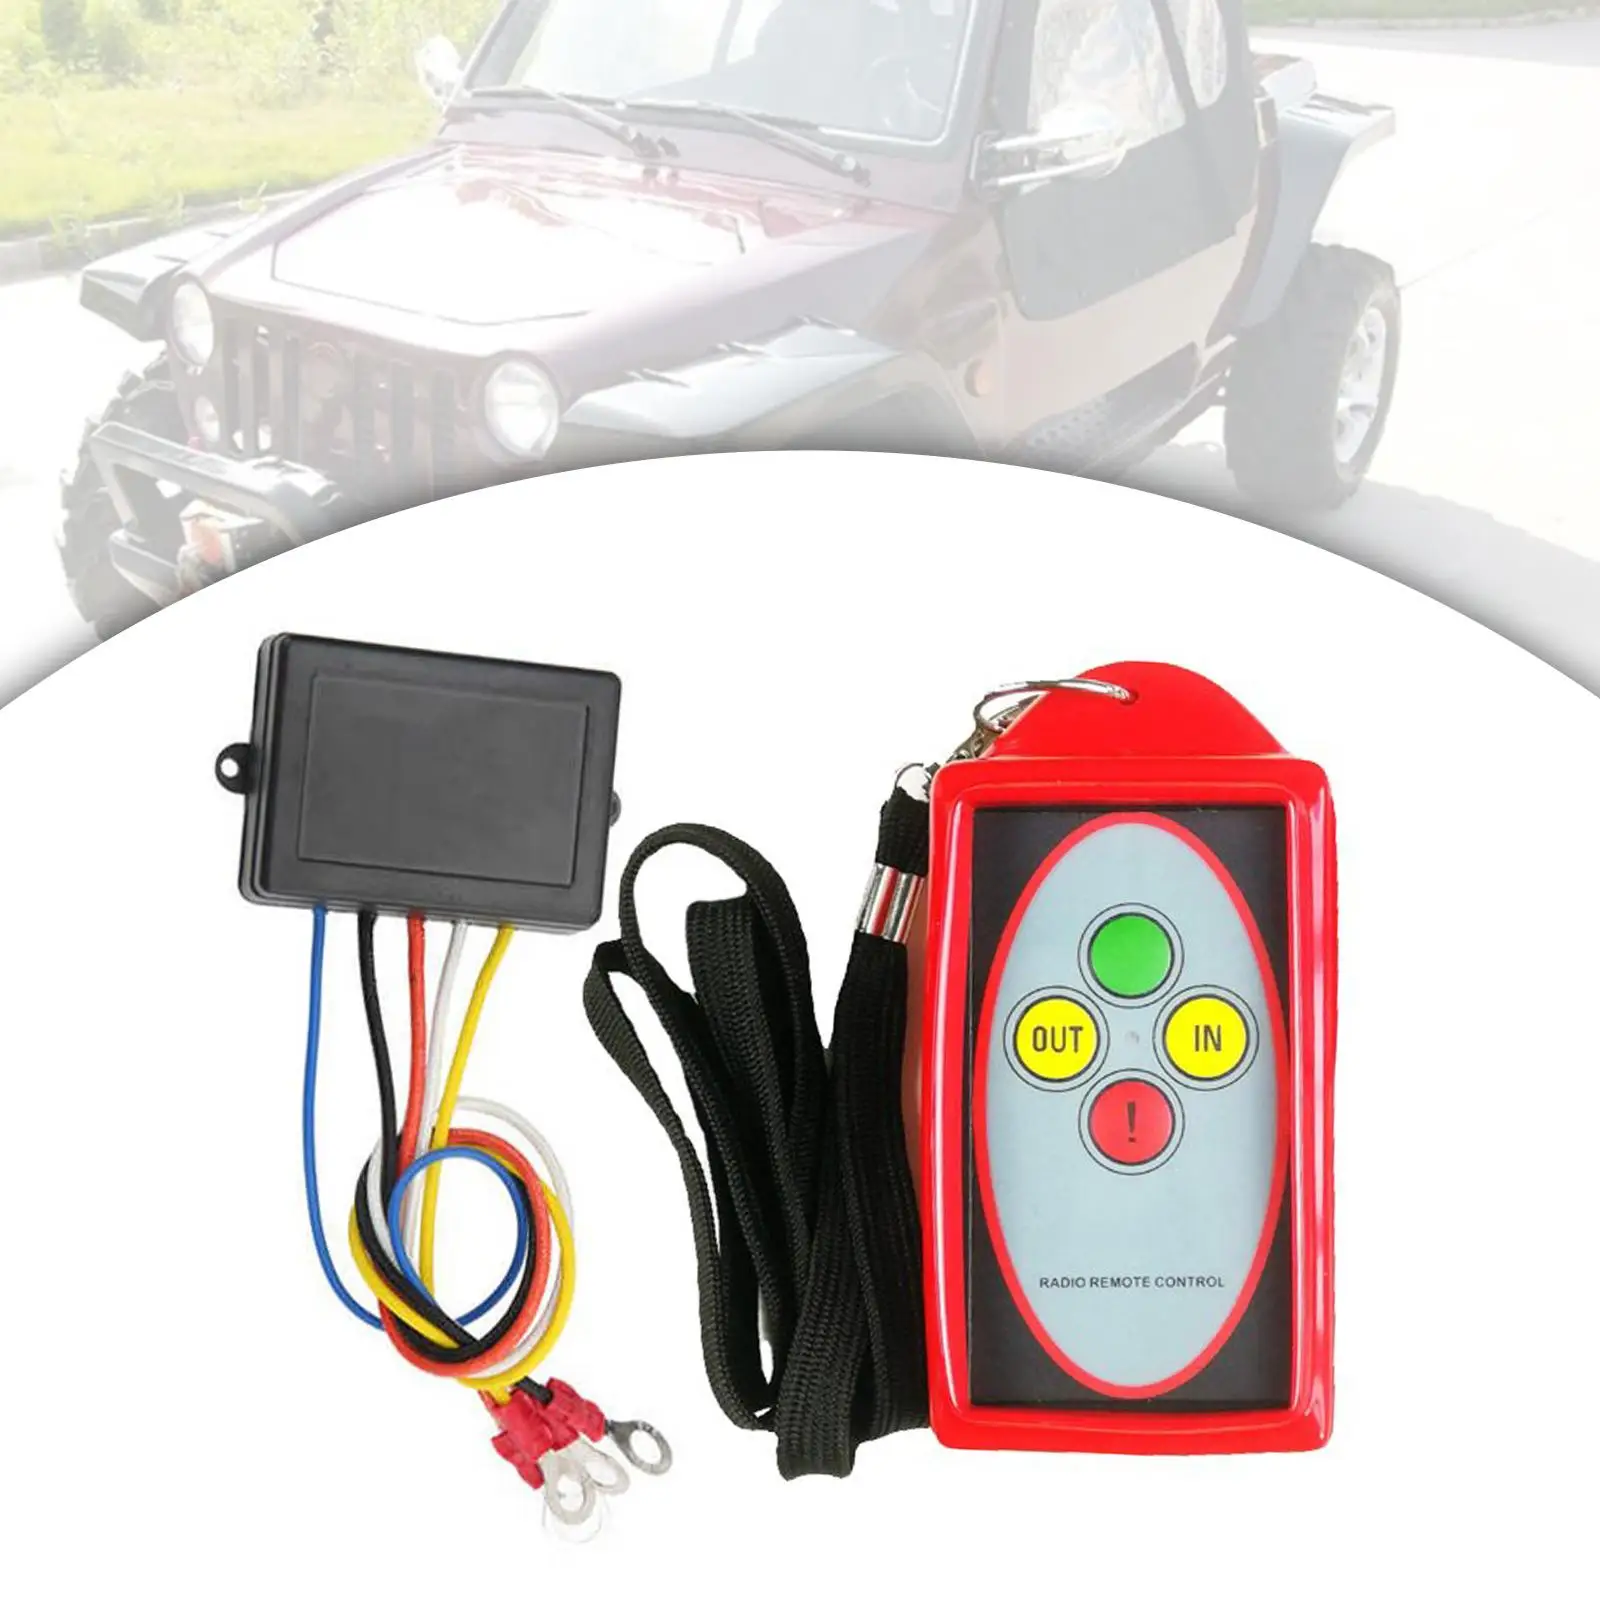 Winch Wireless Remote Control Switch Kit Waterproof Premium 12V 24V 433MHz Remote Receiver Kit Replacement Vehicle Car